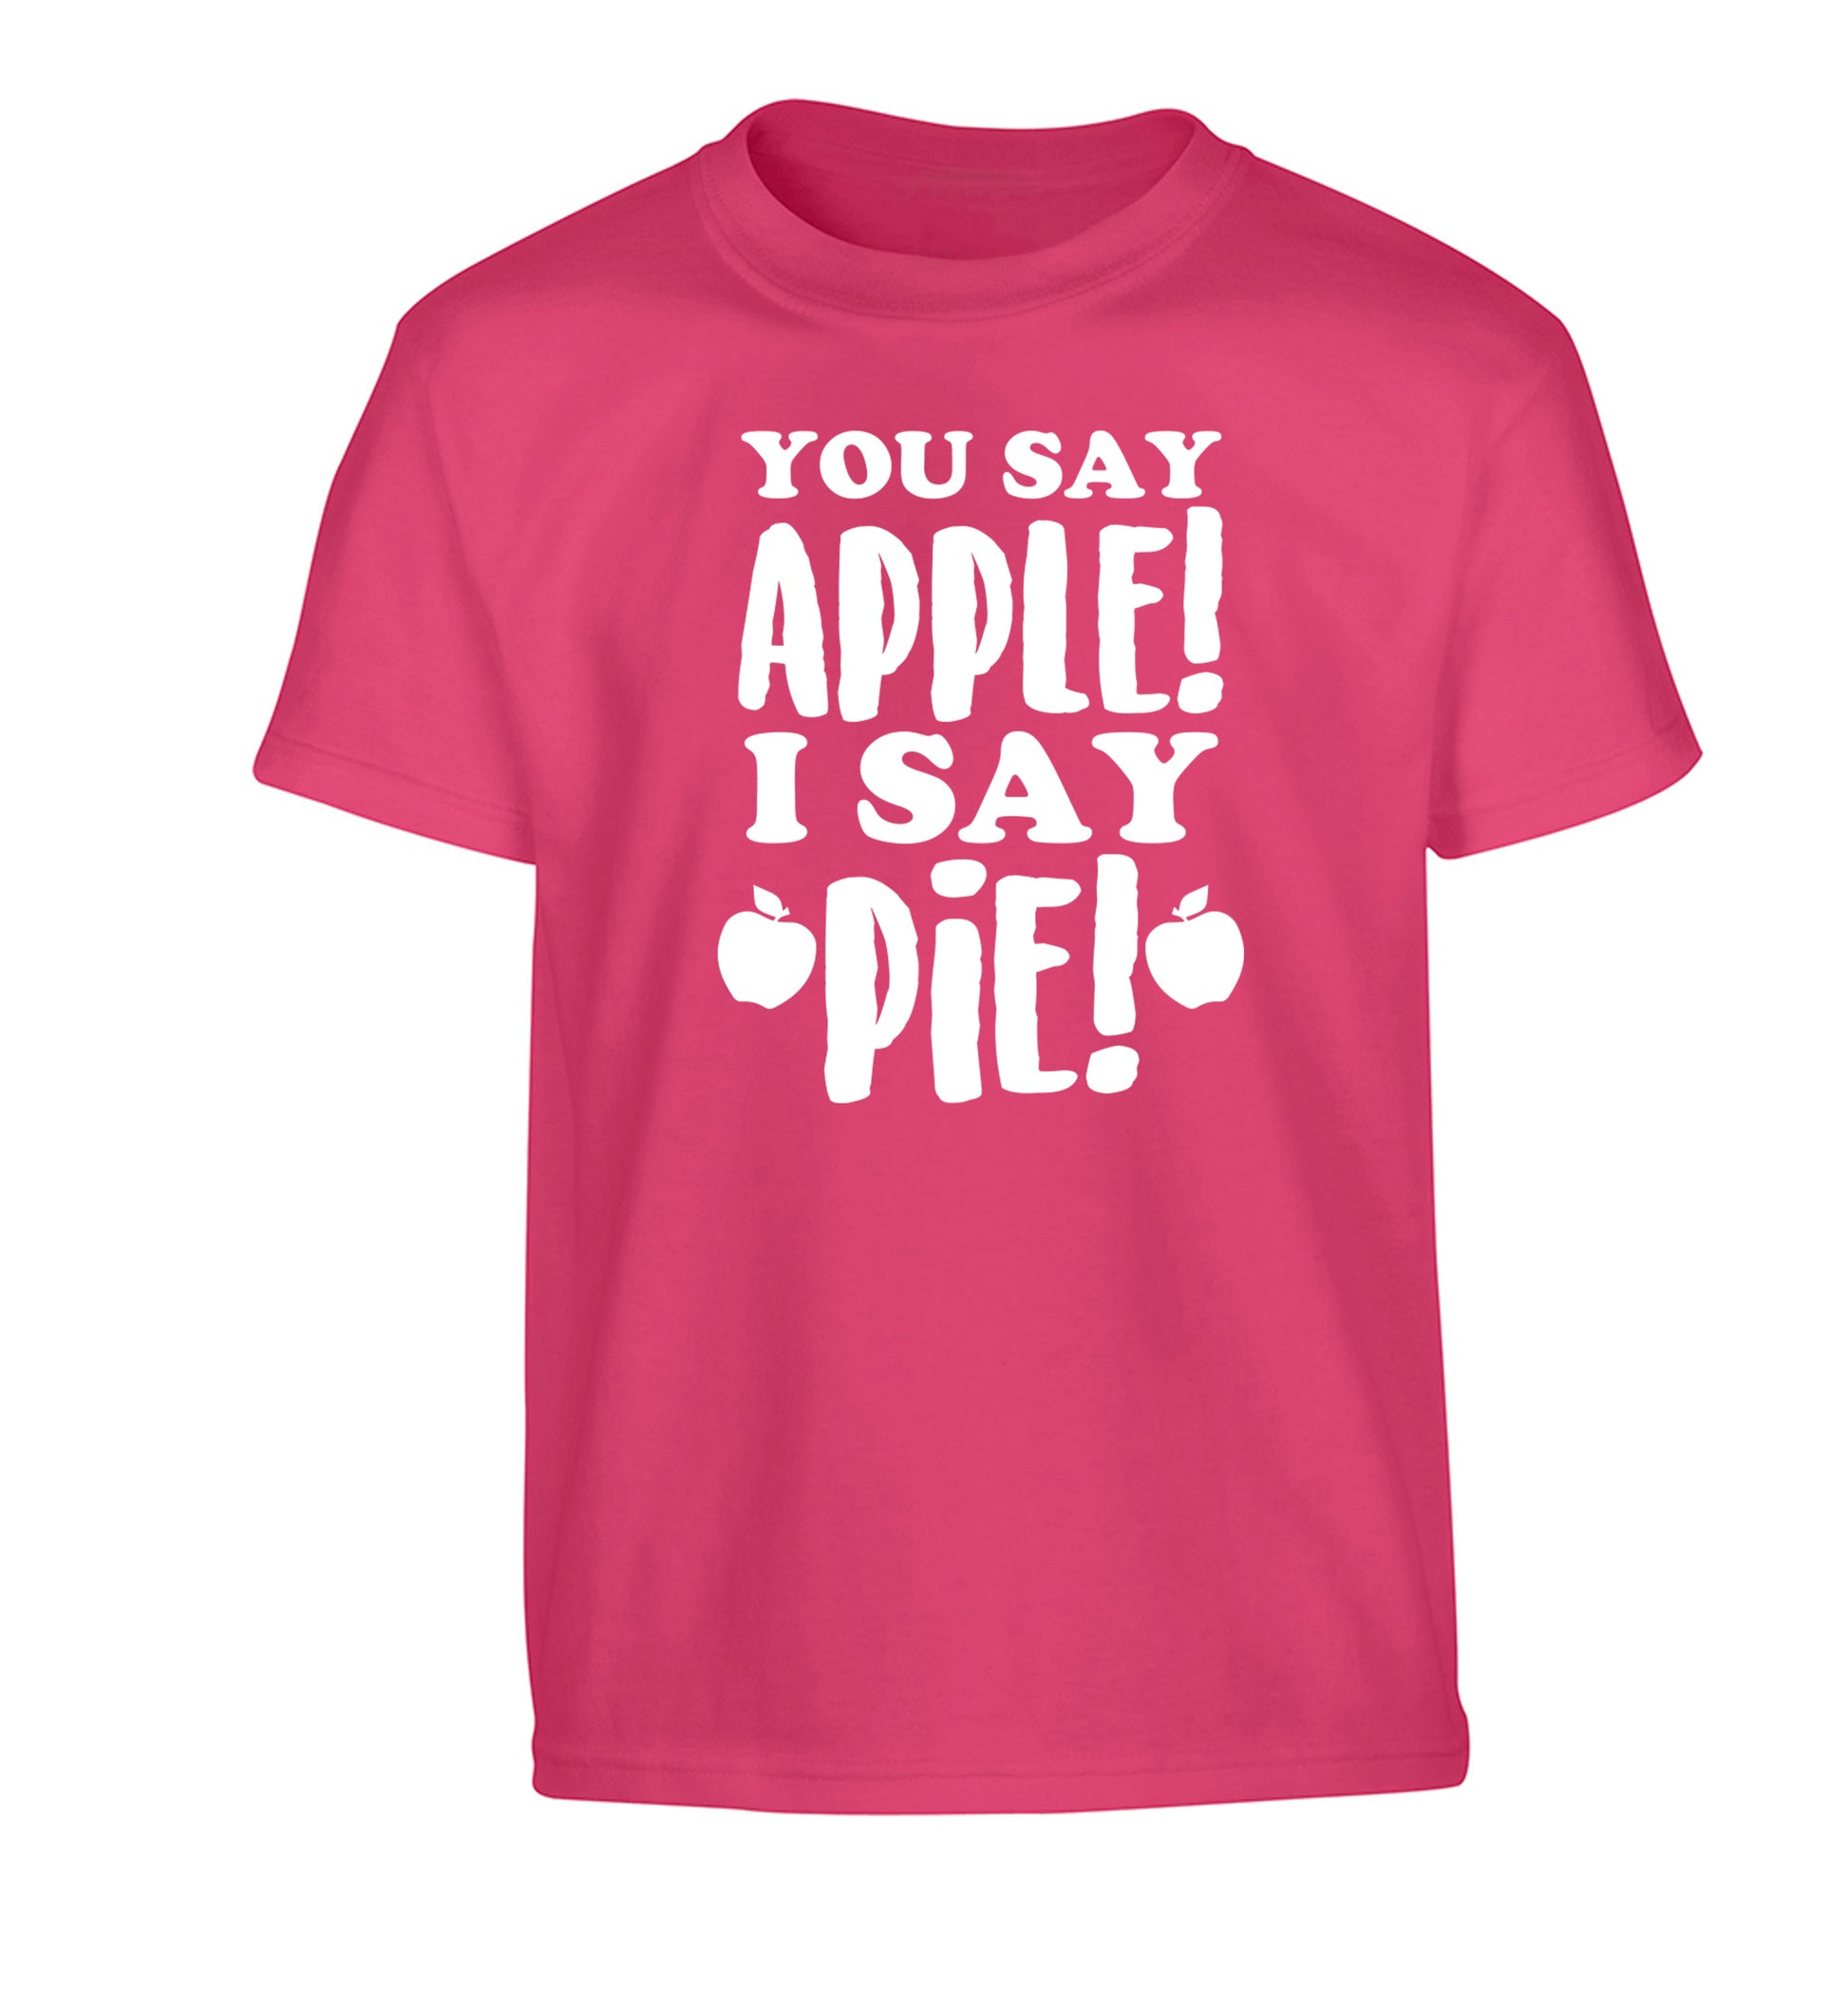 You say apple I say pie! Children's pink Tshirt 12-14 Years